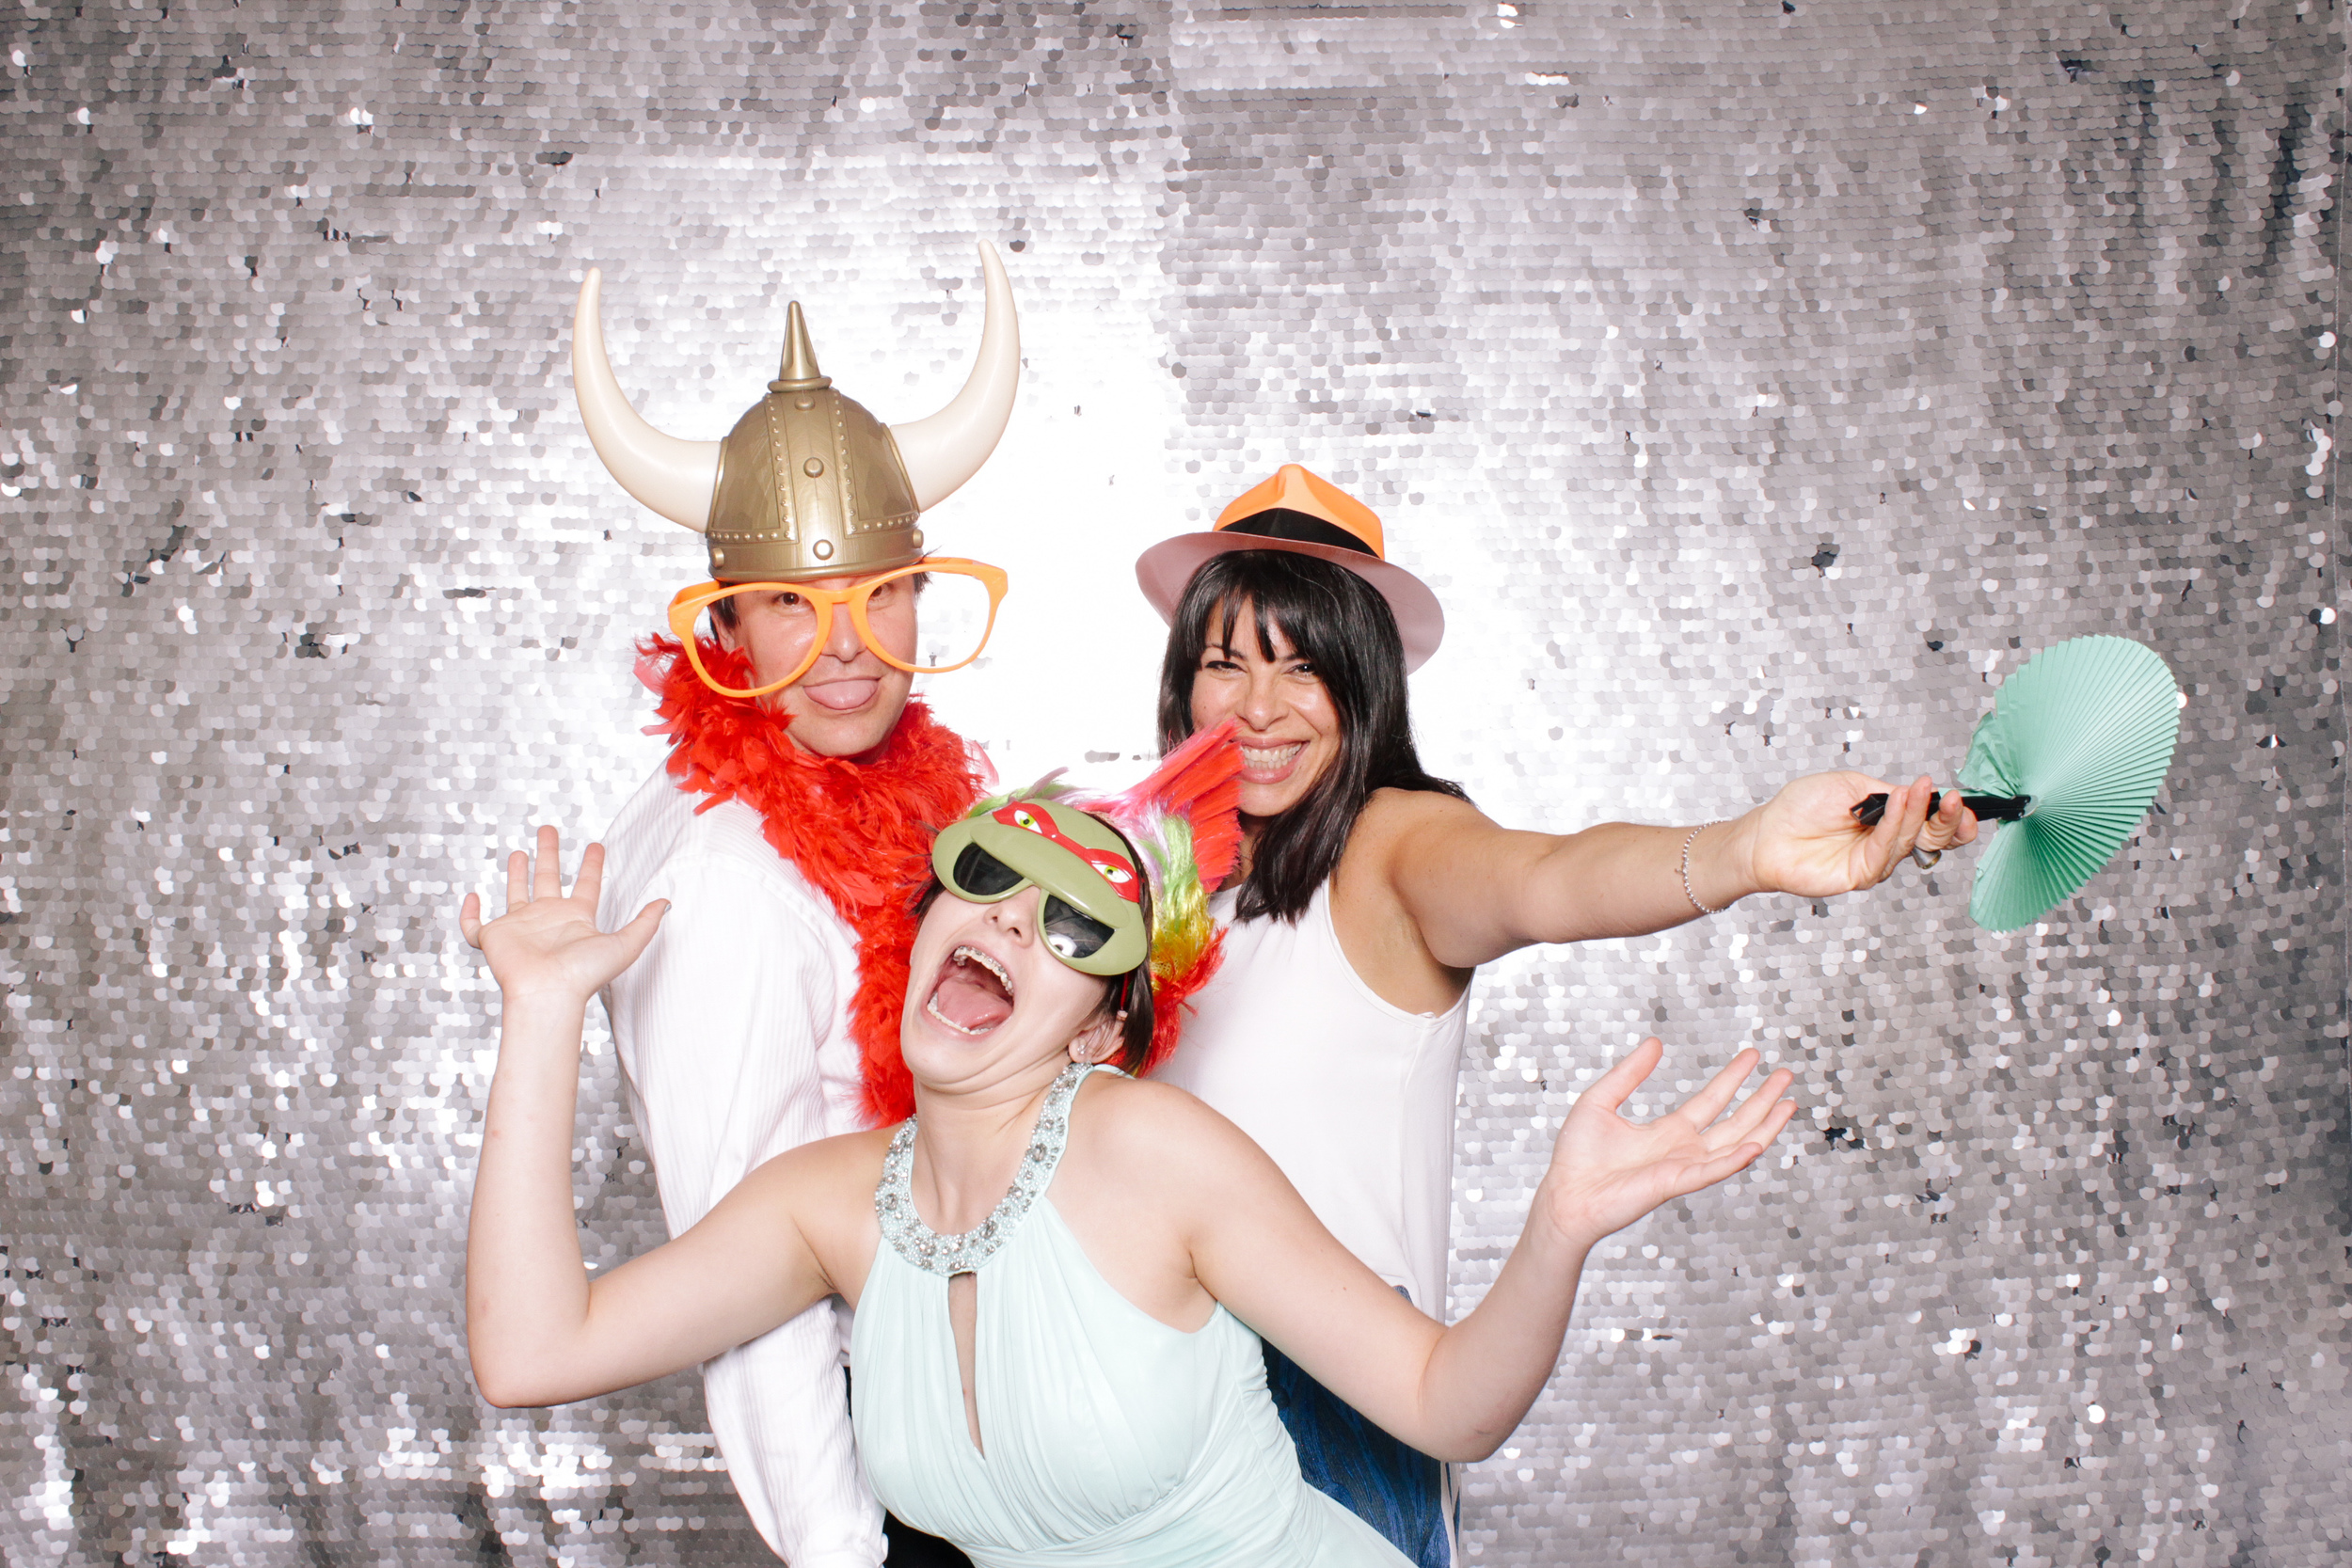 00230-Too Much Awesomeness Photo Booth -20150509.jpg